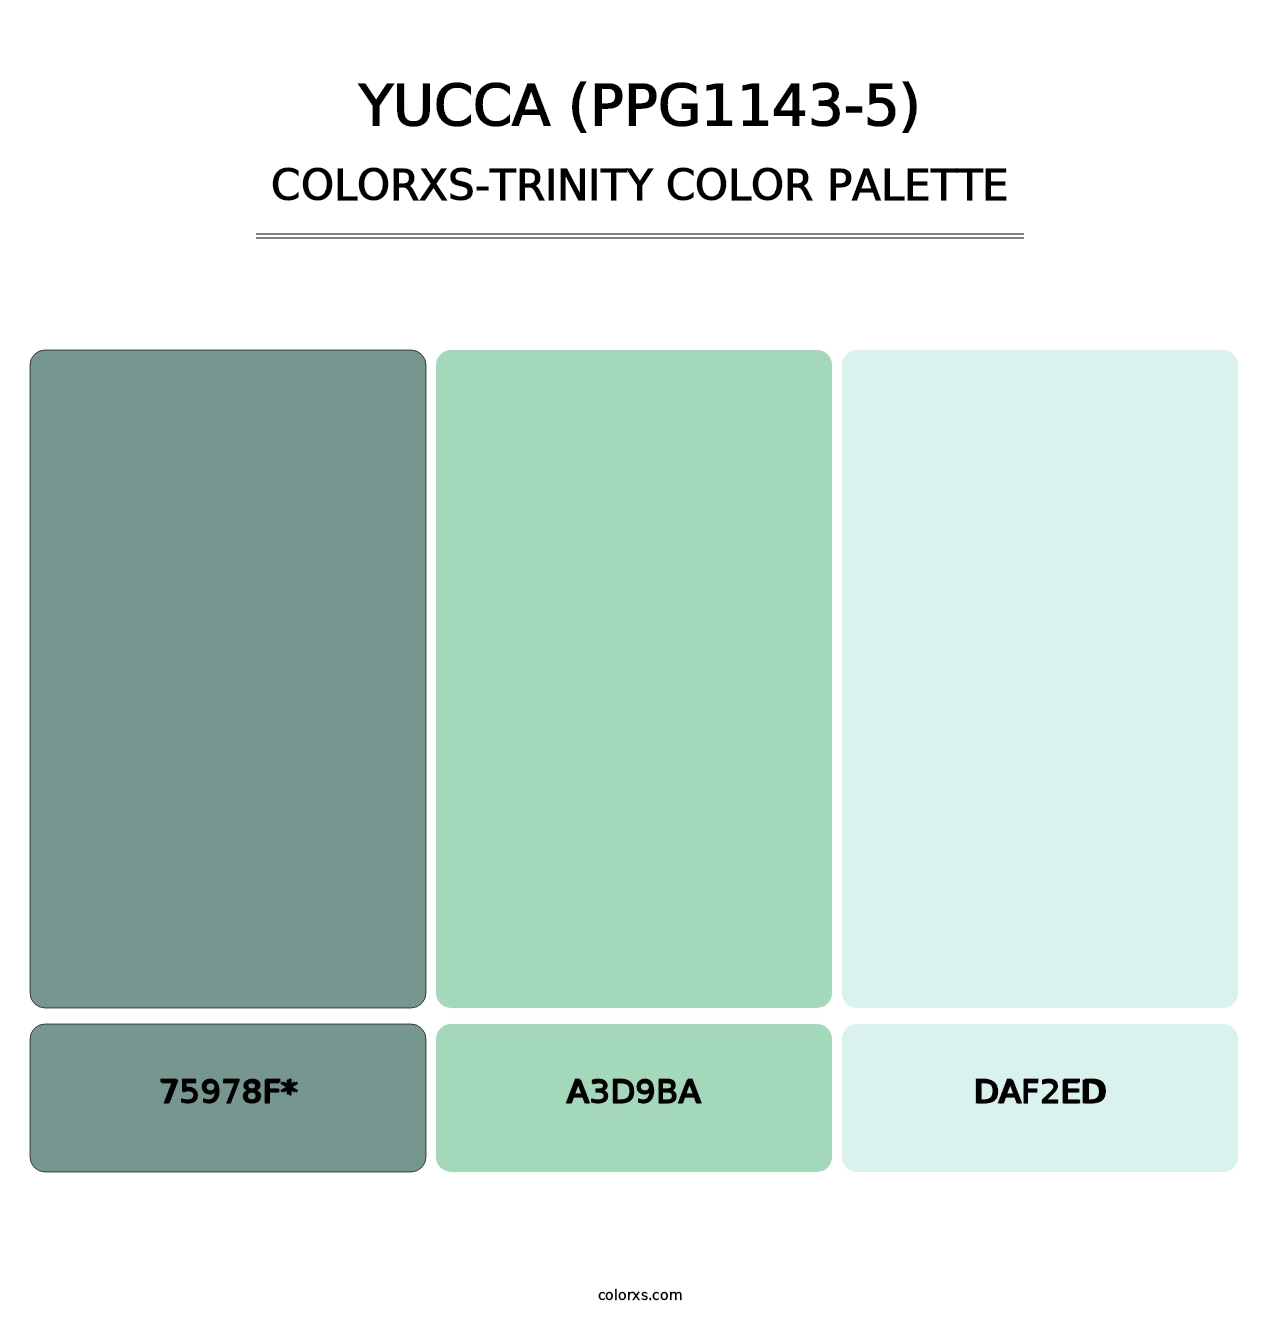 Yucca (PPG1143-5) - Colorxs Trinity Palette